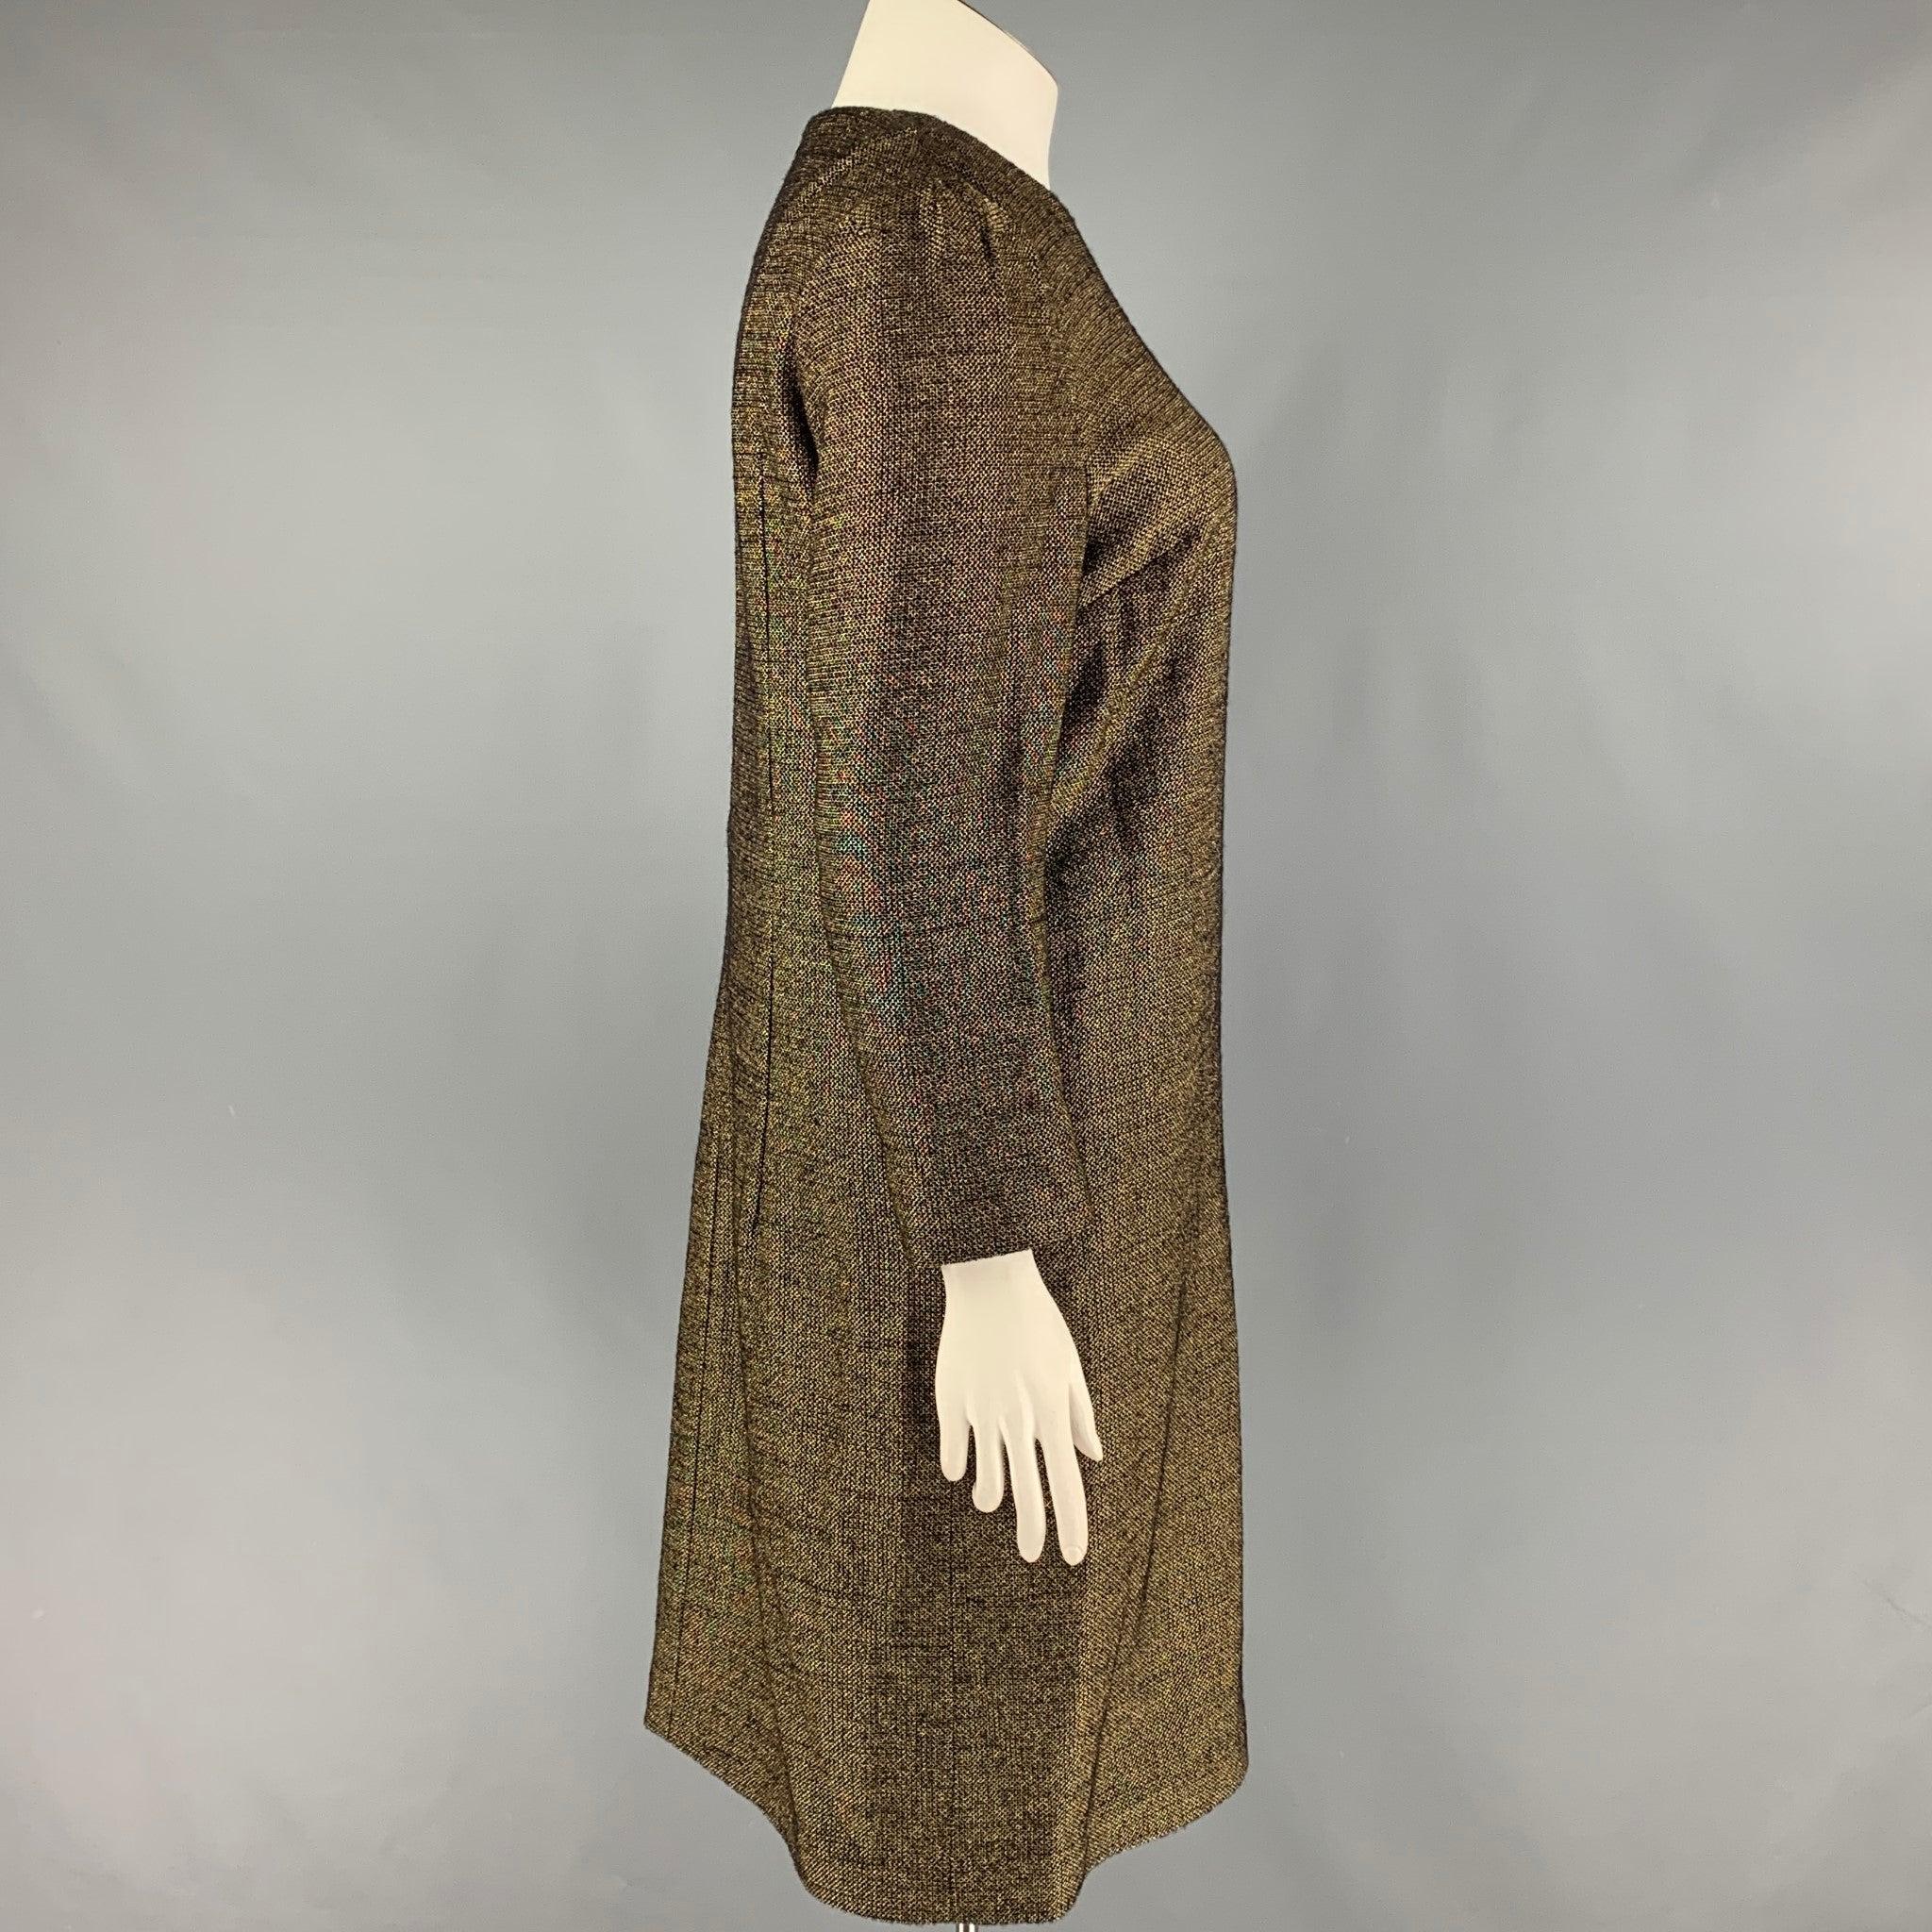 DRIES VAN NOTEN dress comes in a gold wool / viscose featuring a sheath style, bateau neckline, and a back zip up closure.
Very Good
Pre-Owned Condition. 

Marked:   42 

Measurements: 
 
Shoulder: 15.5 inches  Bust: 38 inches  Hip: 40 inches 